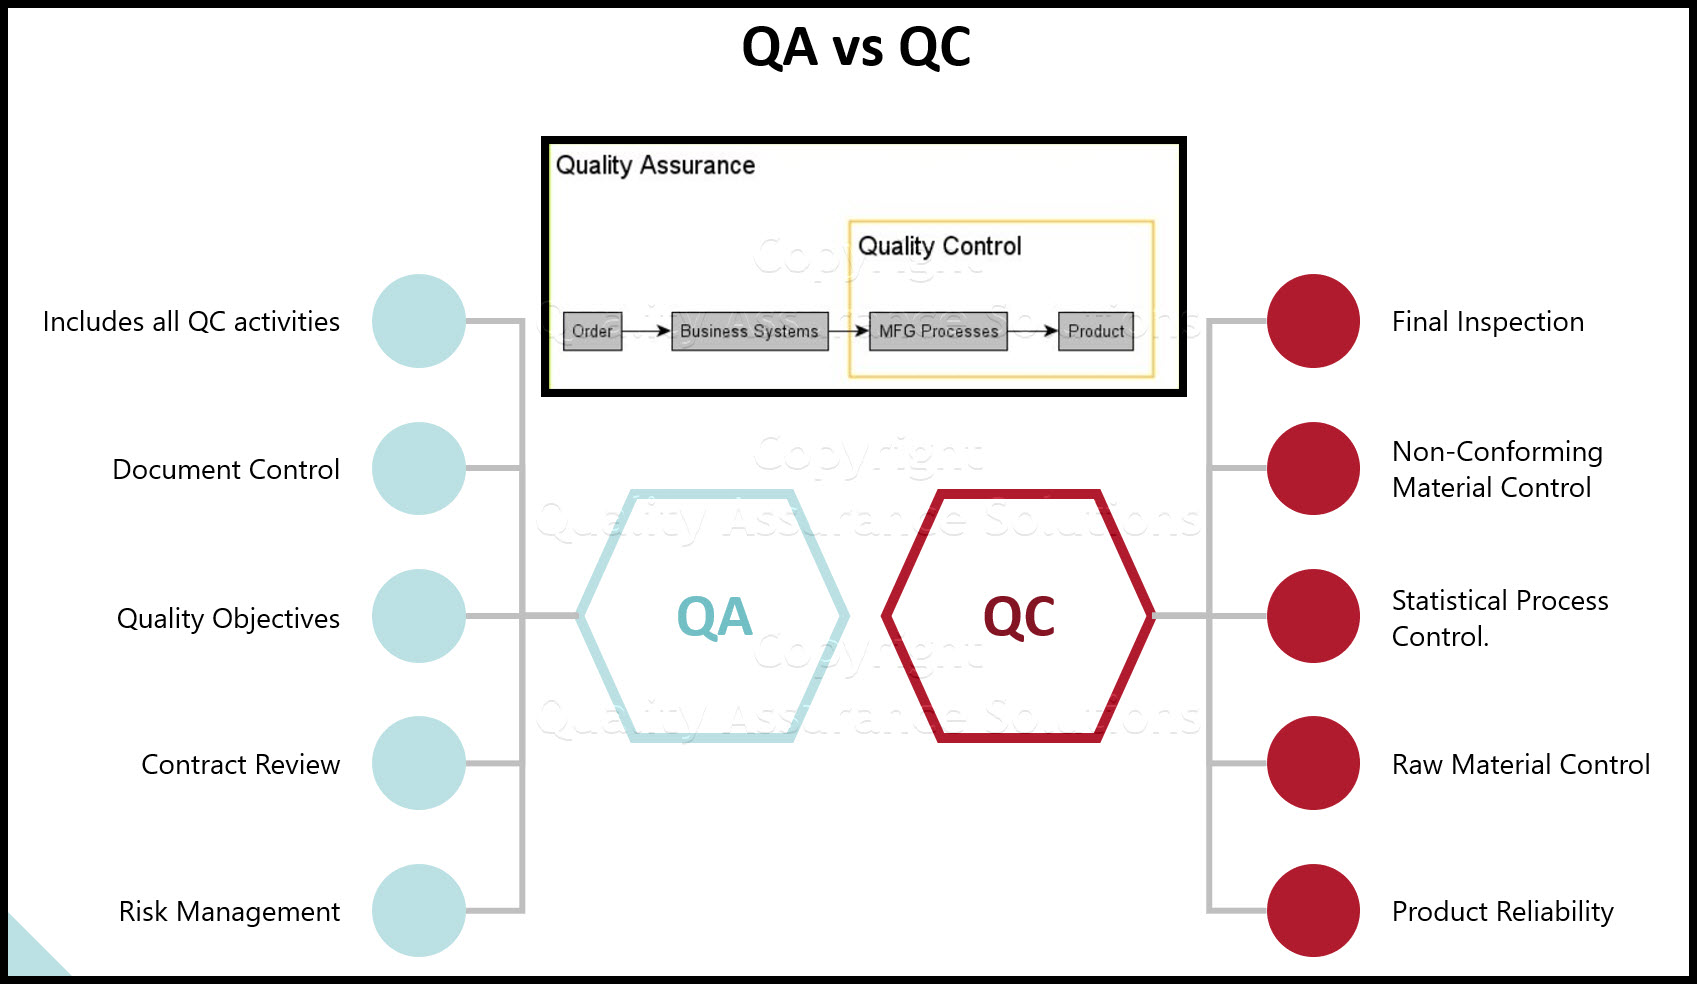 Simple explanation for Quality Assurance vs Quality Control